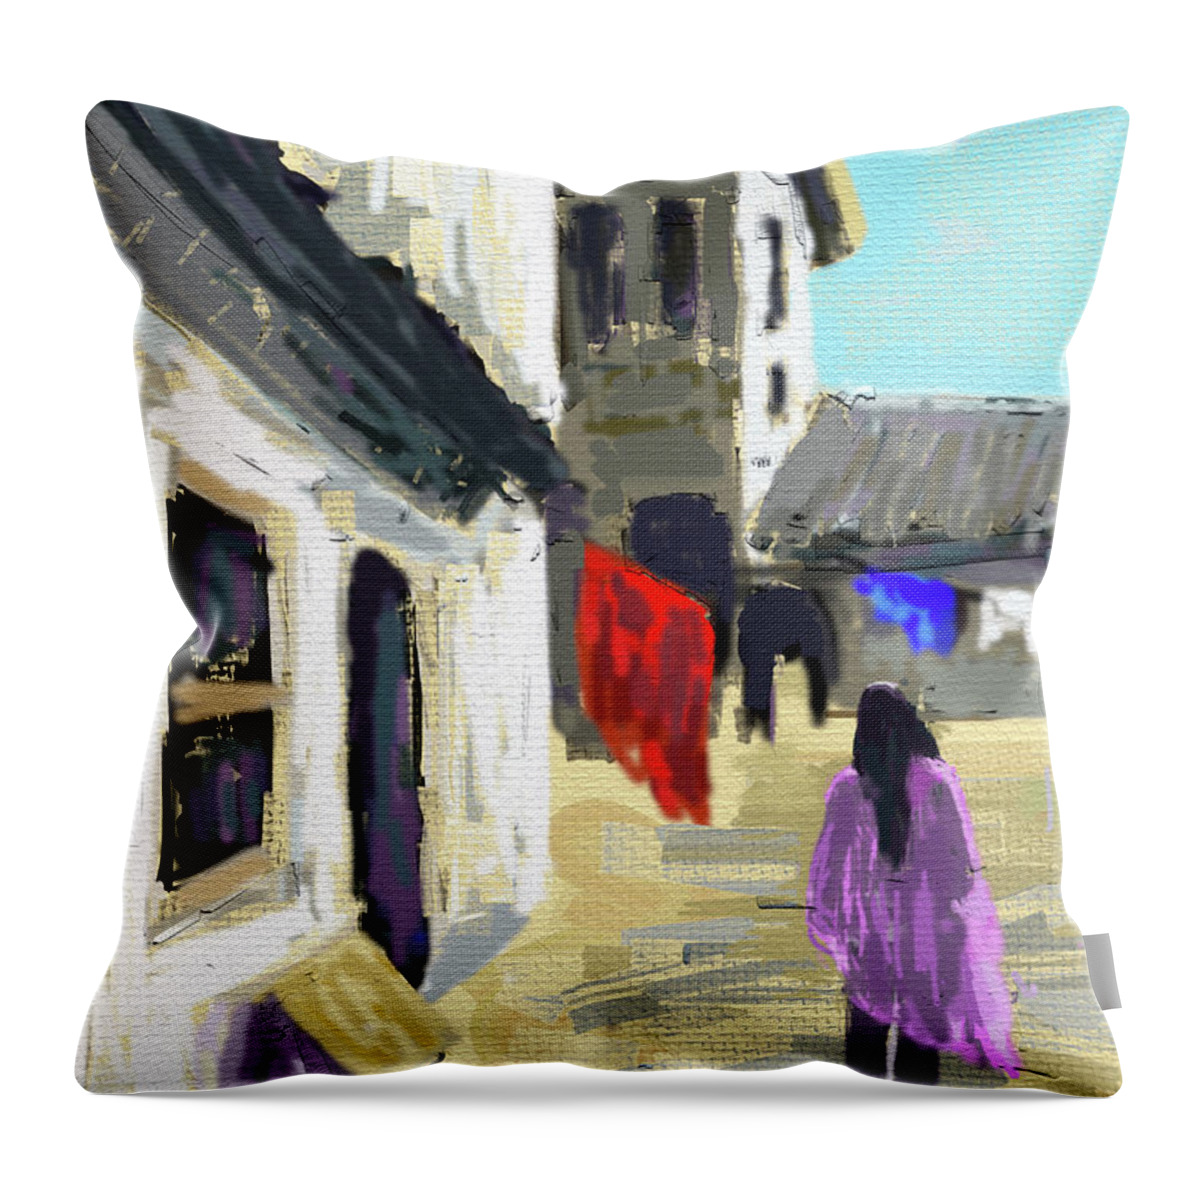 Familiar Yet Unknown Throw Pillow featuring the digital art Familiar yet unknown by Uma Krishnamoorthy